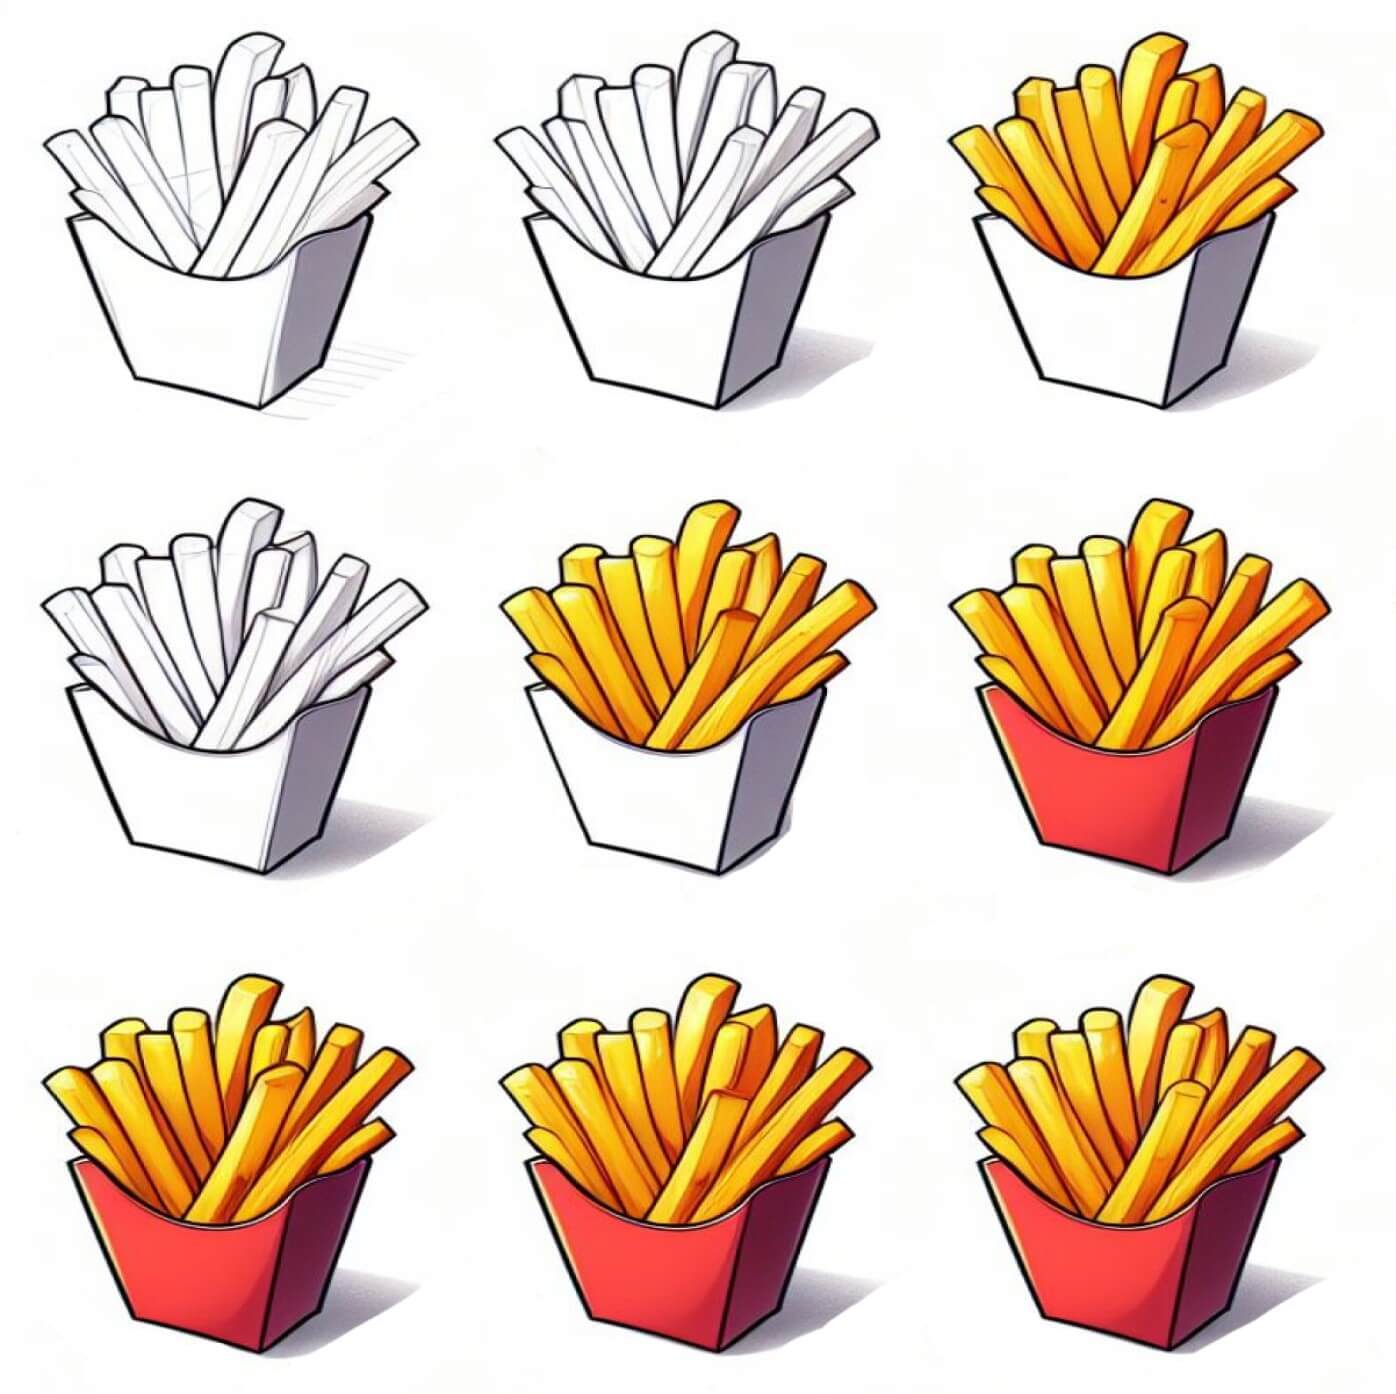 French fries (9) Drawing Ideas